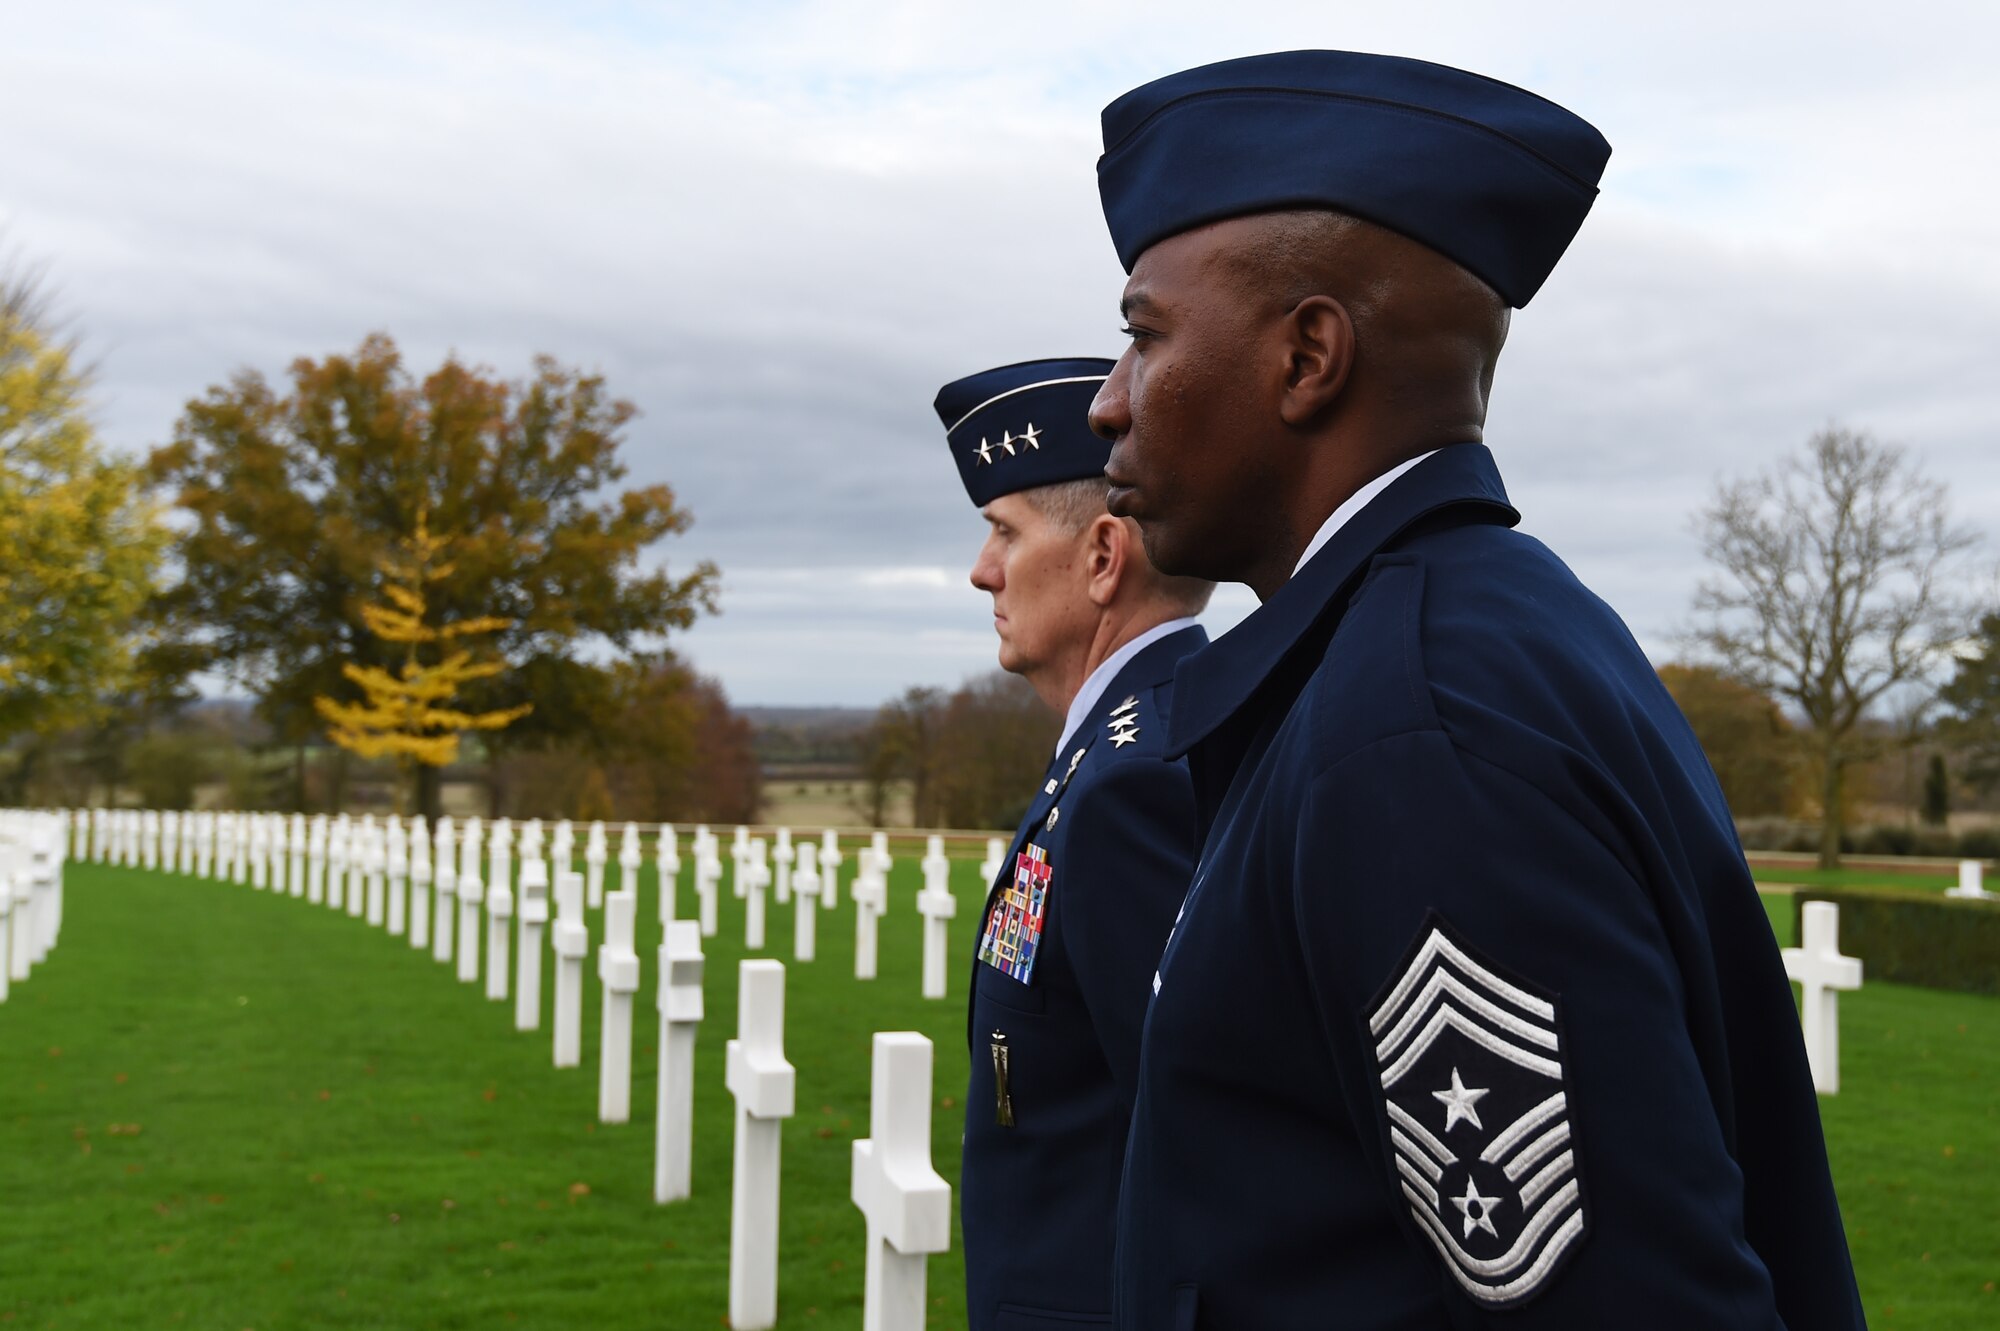 U.S. Air Force Lt. Gen. Timothy Ray, 3rd Air Force and 17th Expeditionary Air Force commander, left, and Chief Master Sgt. Kaleth Wright, 3rd AF and 17th EAF command chief, look across rows of headstones, following a Veterans Day ceremony at Cambridge American Cemetery, United Kingdom, Nov. 11, 2015. The cemetery serves as the final resting place for 3,812 American Service members killed during World War II. (U.S. Air Force photo by Staff Sgt. Jarad A. Denton/Released)